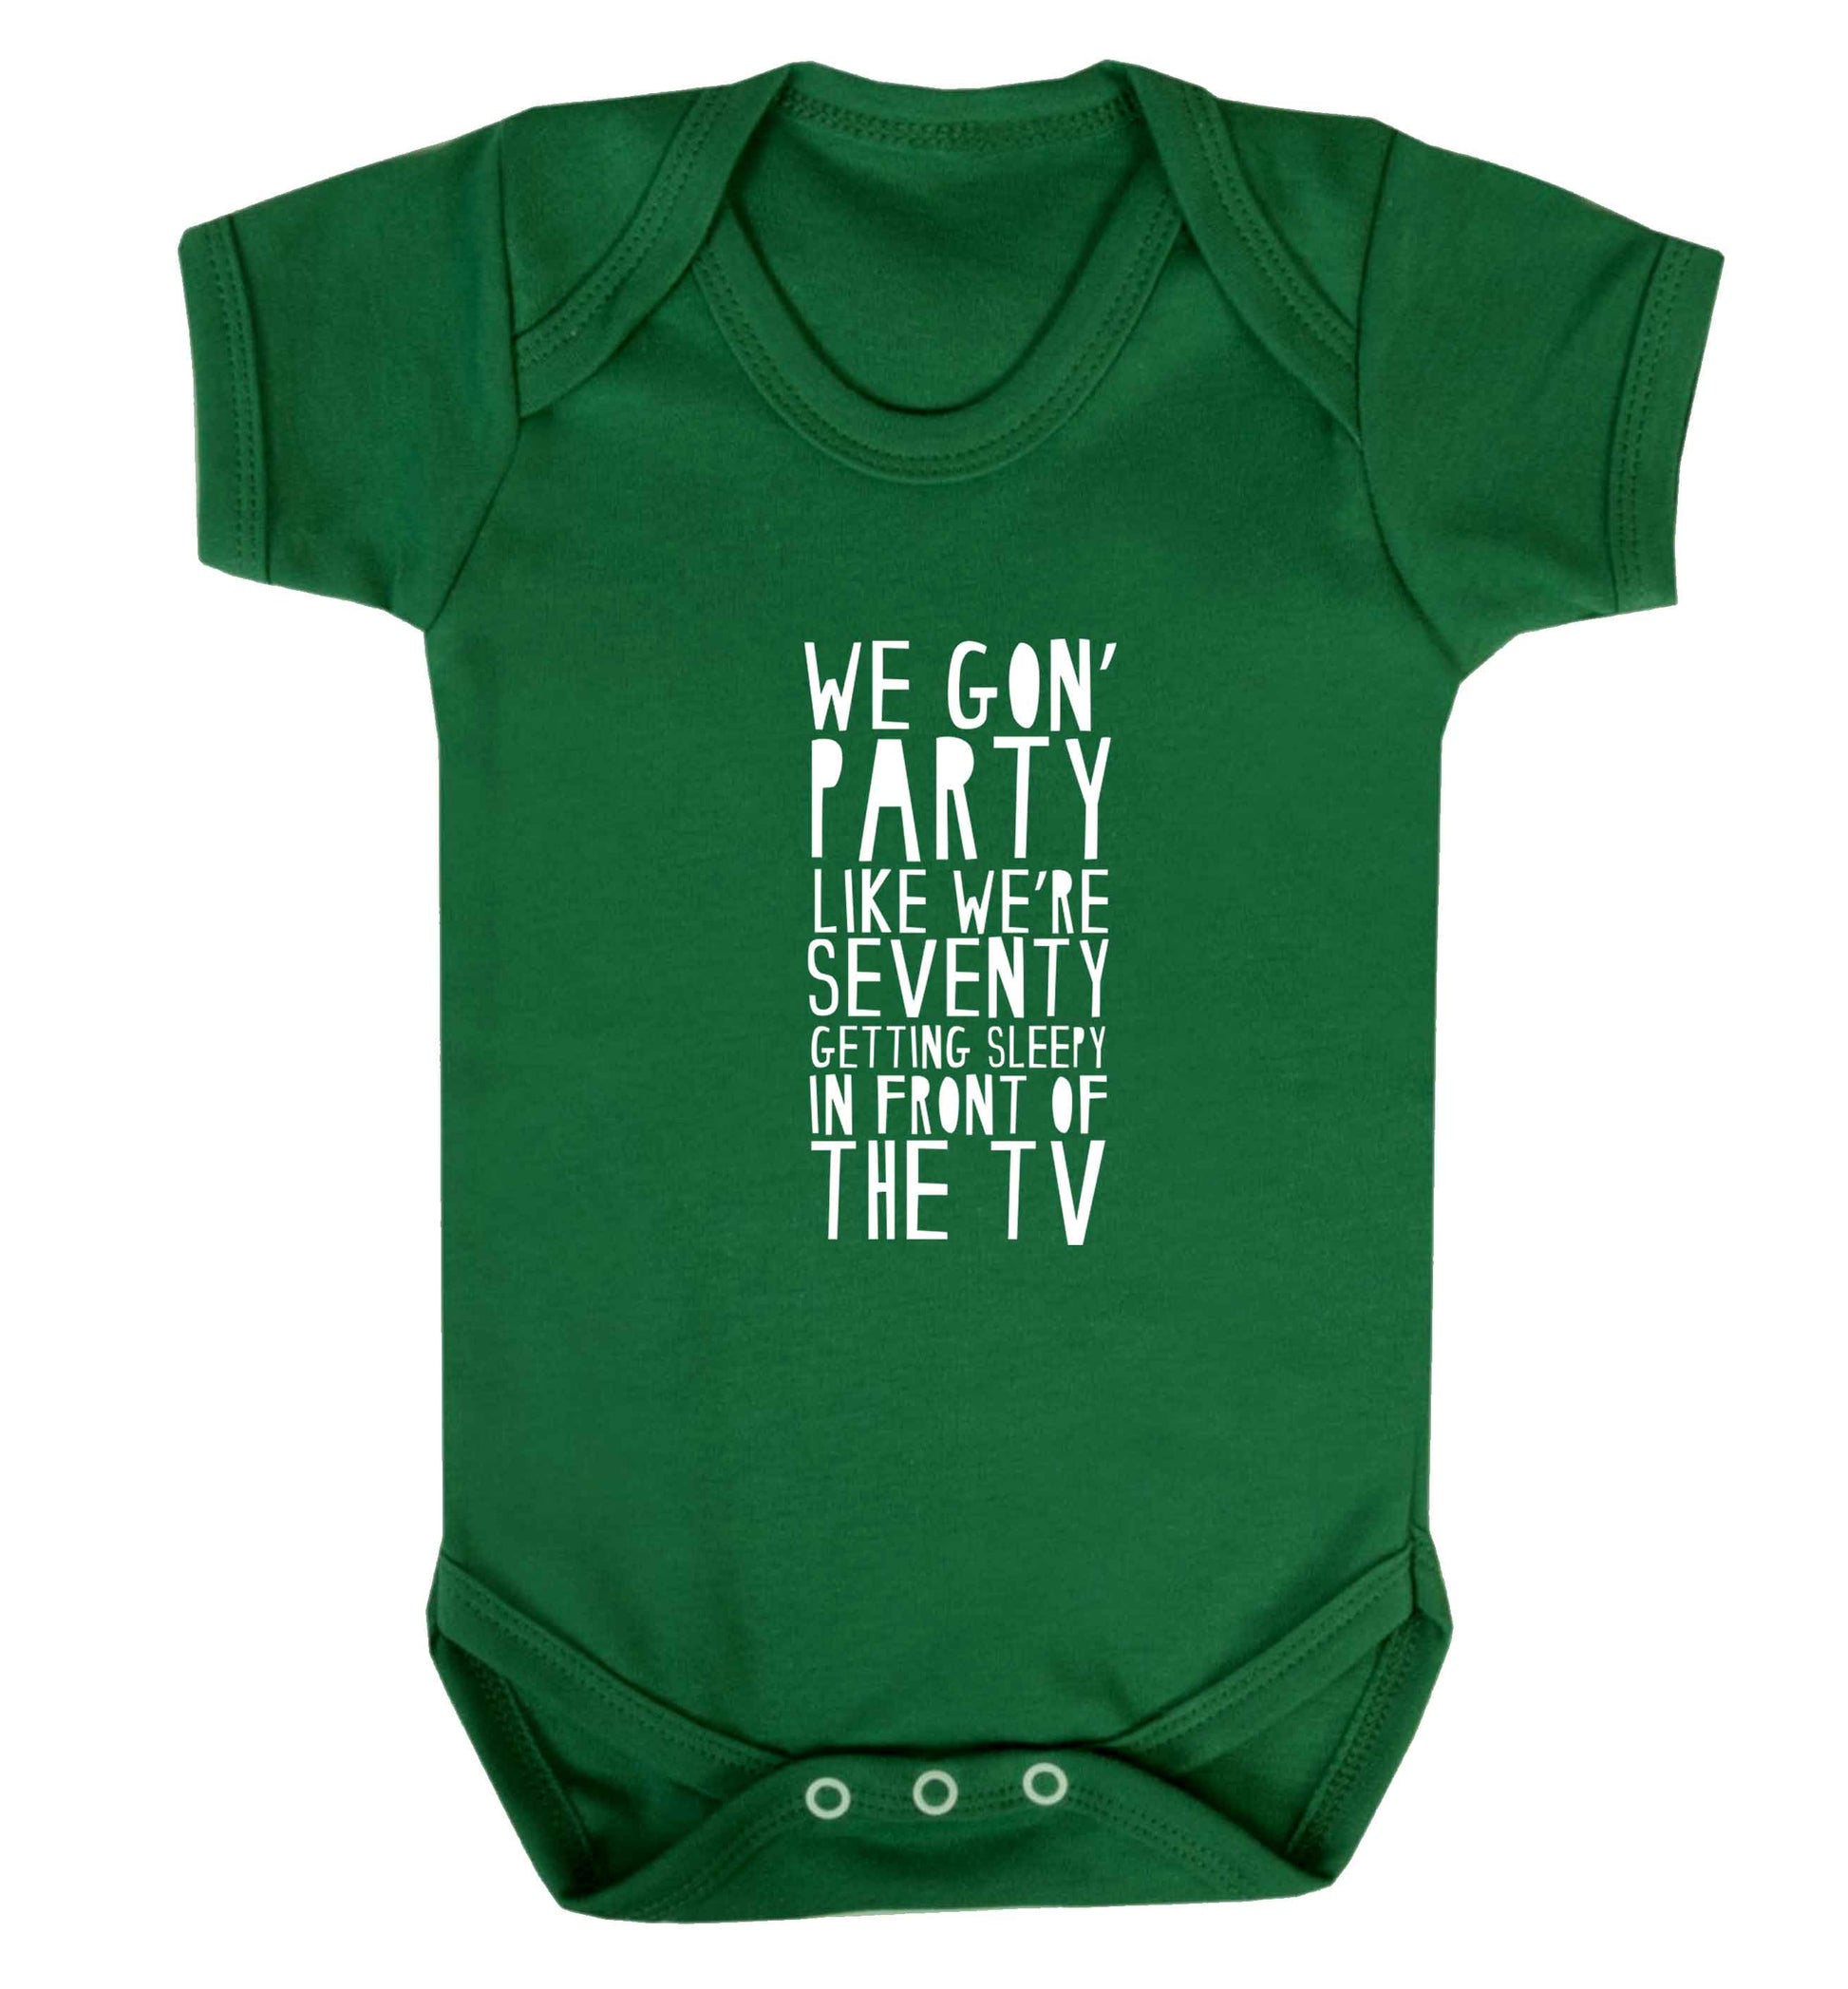 We gon' party like we're seventy getting sleepy in front of the TV baby vest green 18-24 months